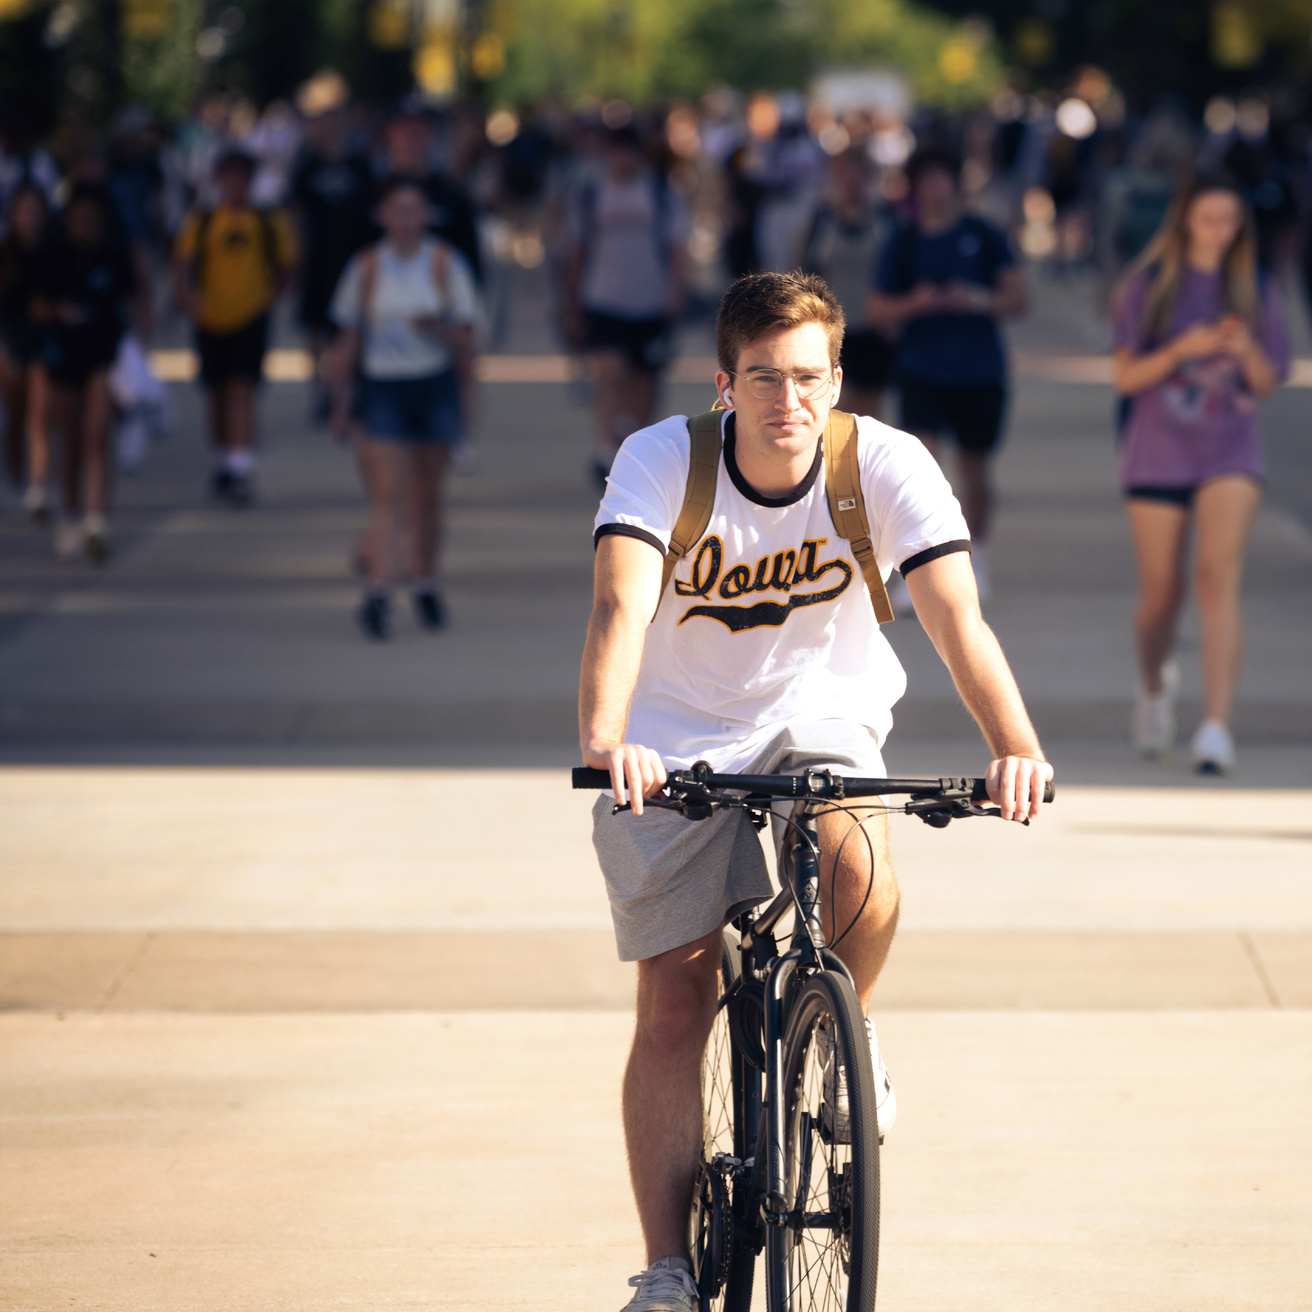 A biker wearing an "Iowa" shirt riding past other students on T. Anne Cleary walkway